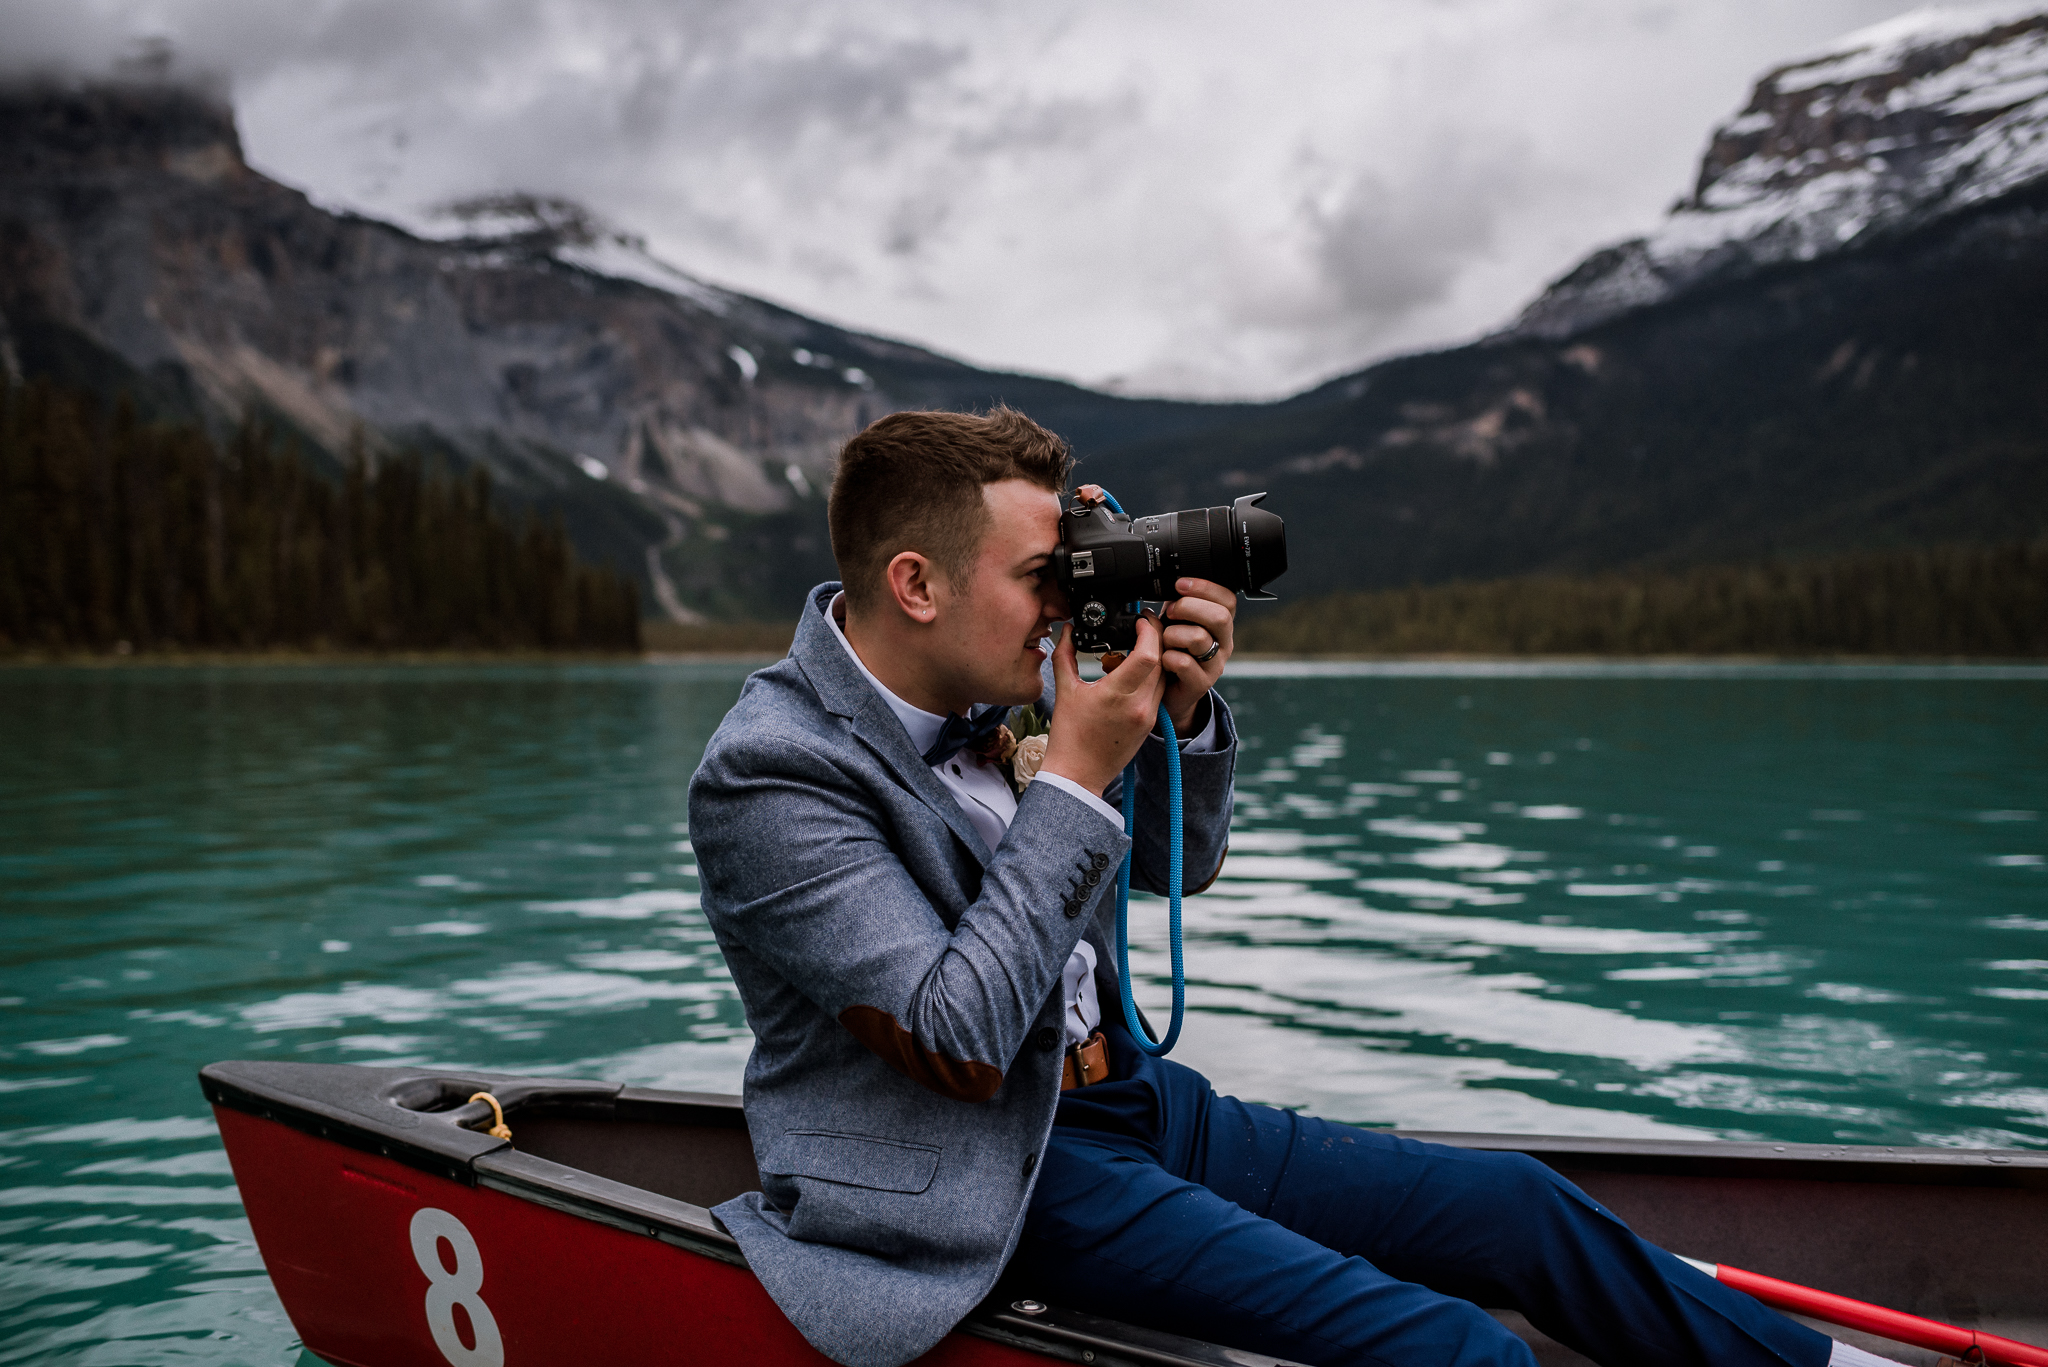 Groom taking a picture in red canoe at Emerald Lake, BC